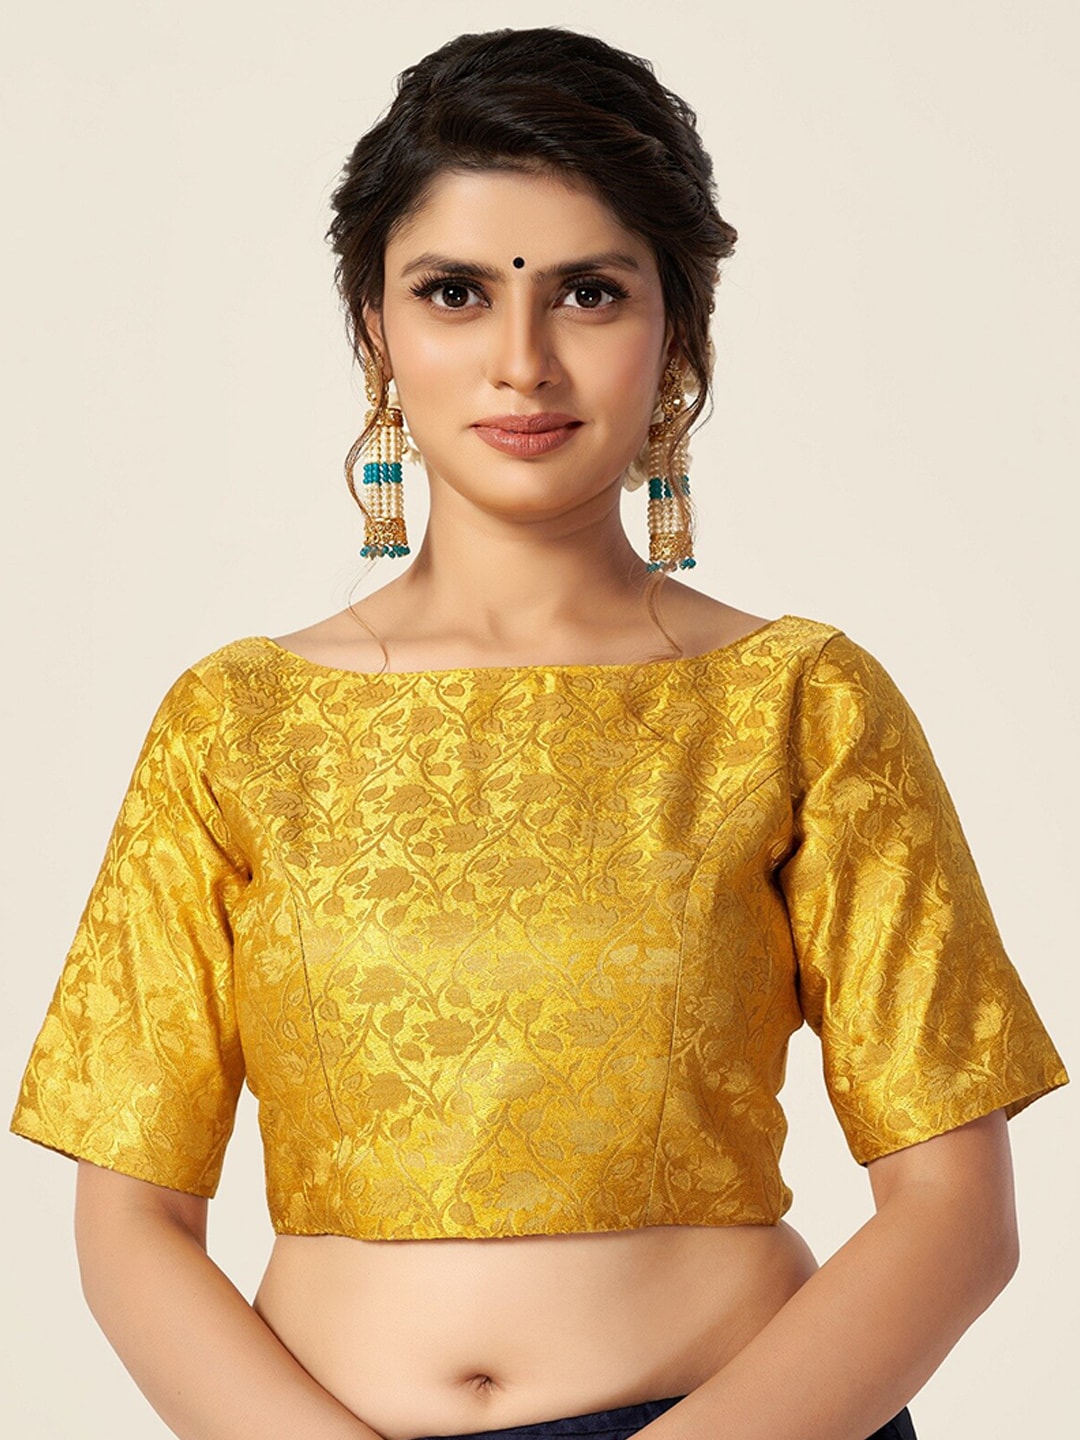 HIMRISE Women Yellow Woven Design Saree Blouse Price in India